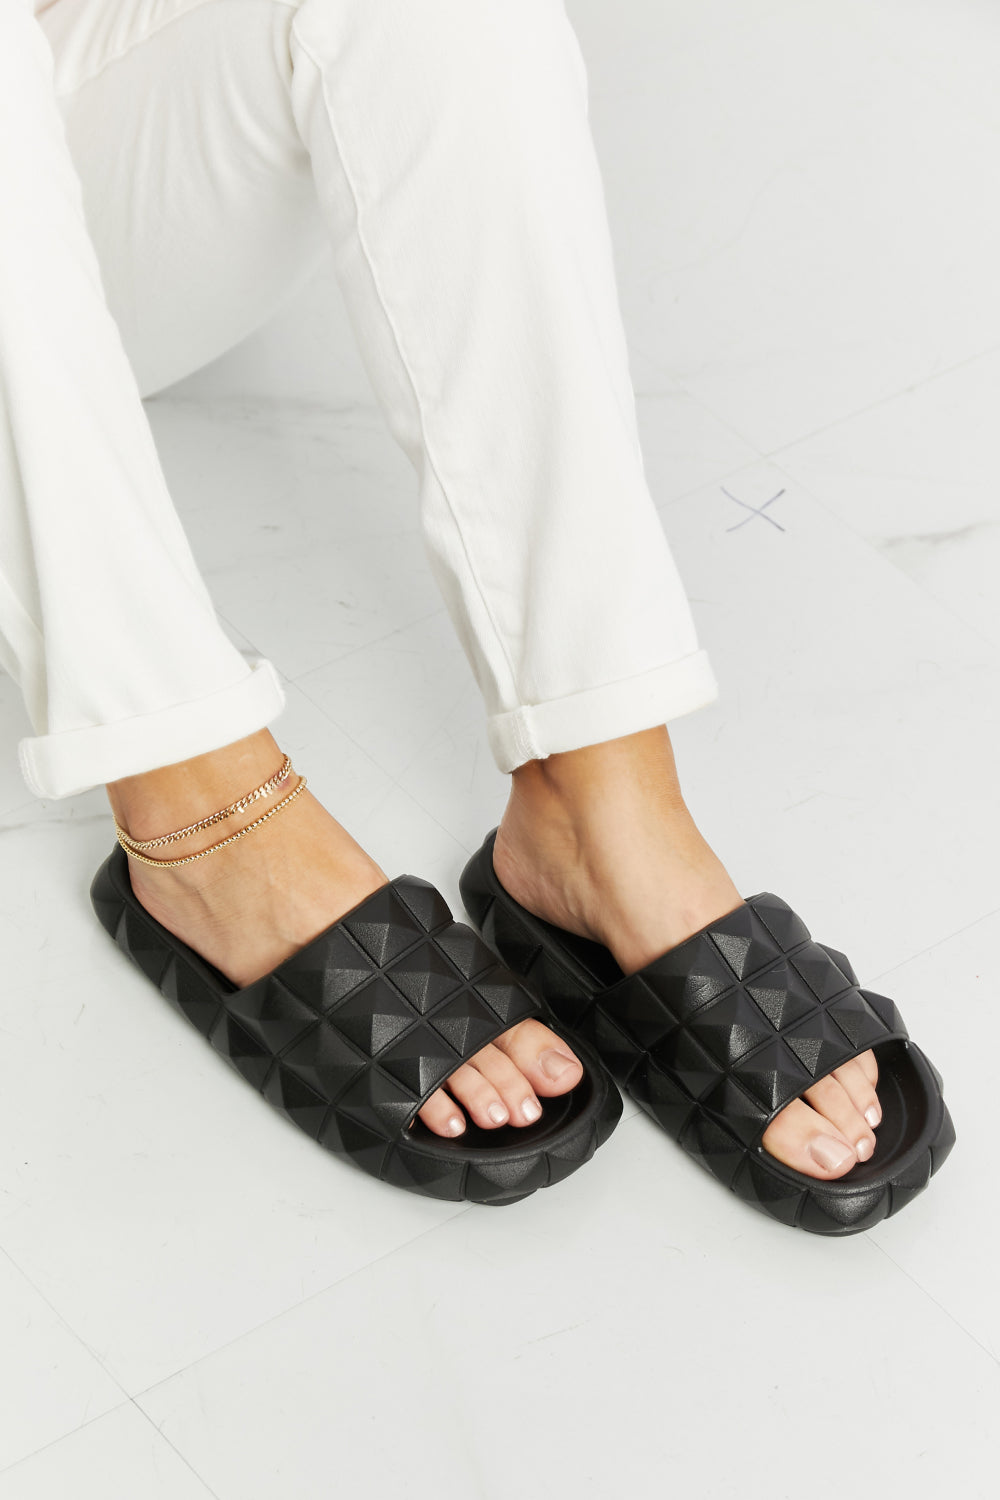 Cloud Walk Faux Rubber 3D Sandals | Hypoallergenic - Allergy Friendly - Naturally Free